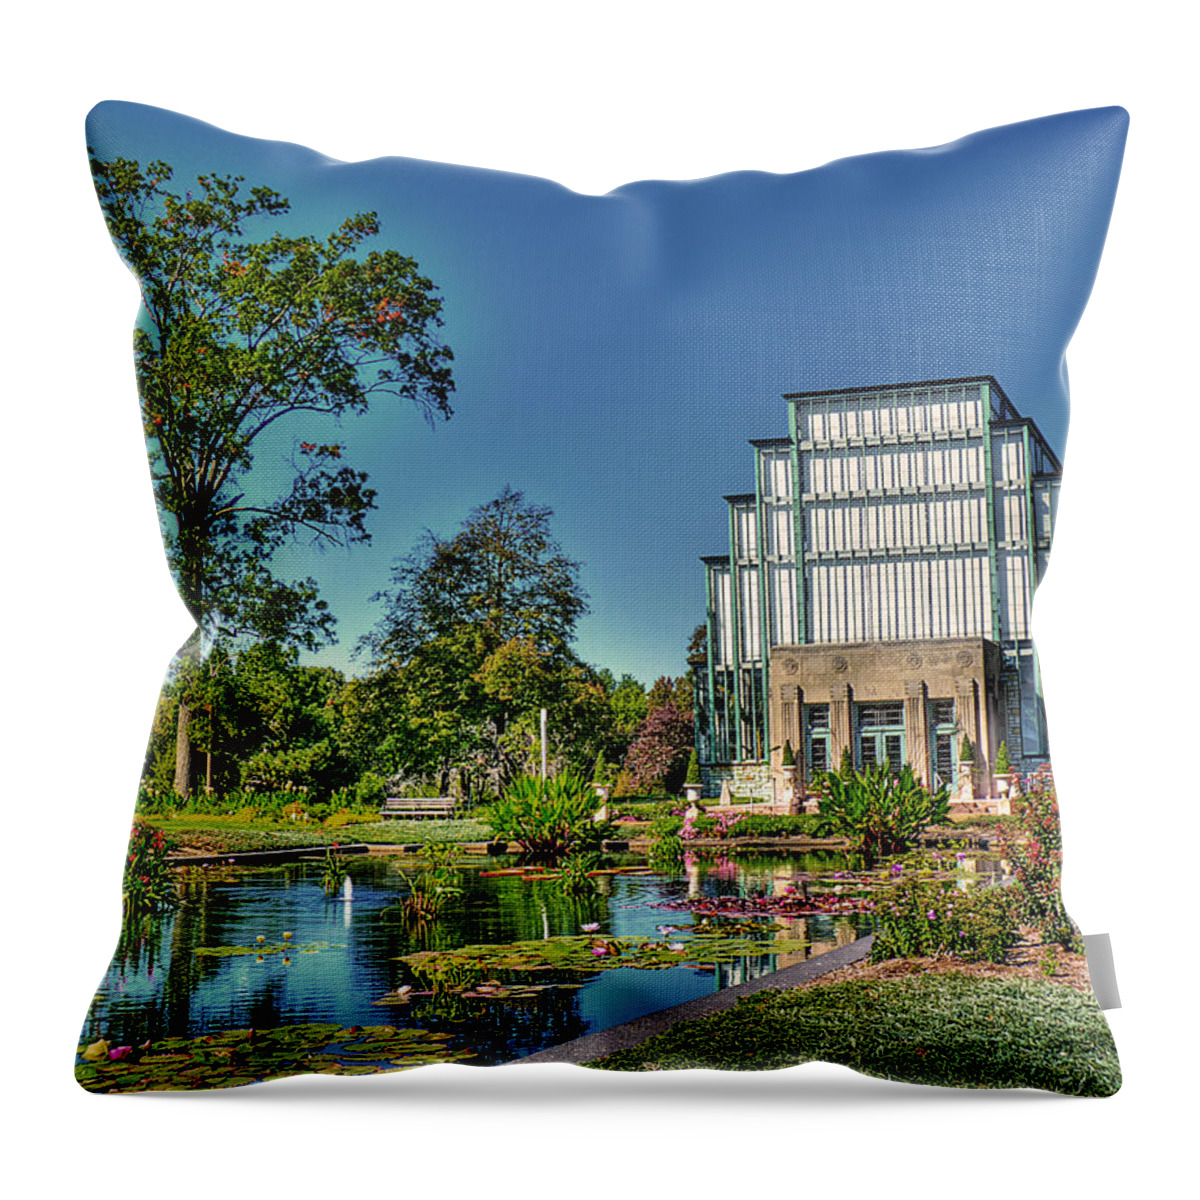 Conservatory Throw Pillow featuring the photograph The Jewel Box by William Fields